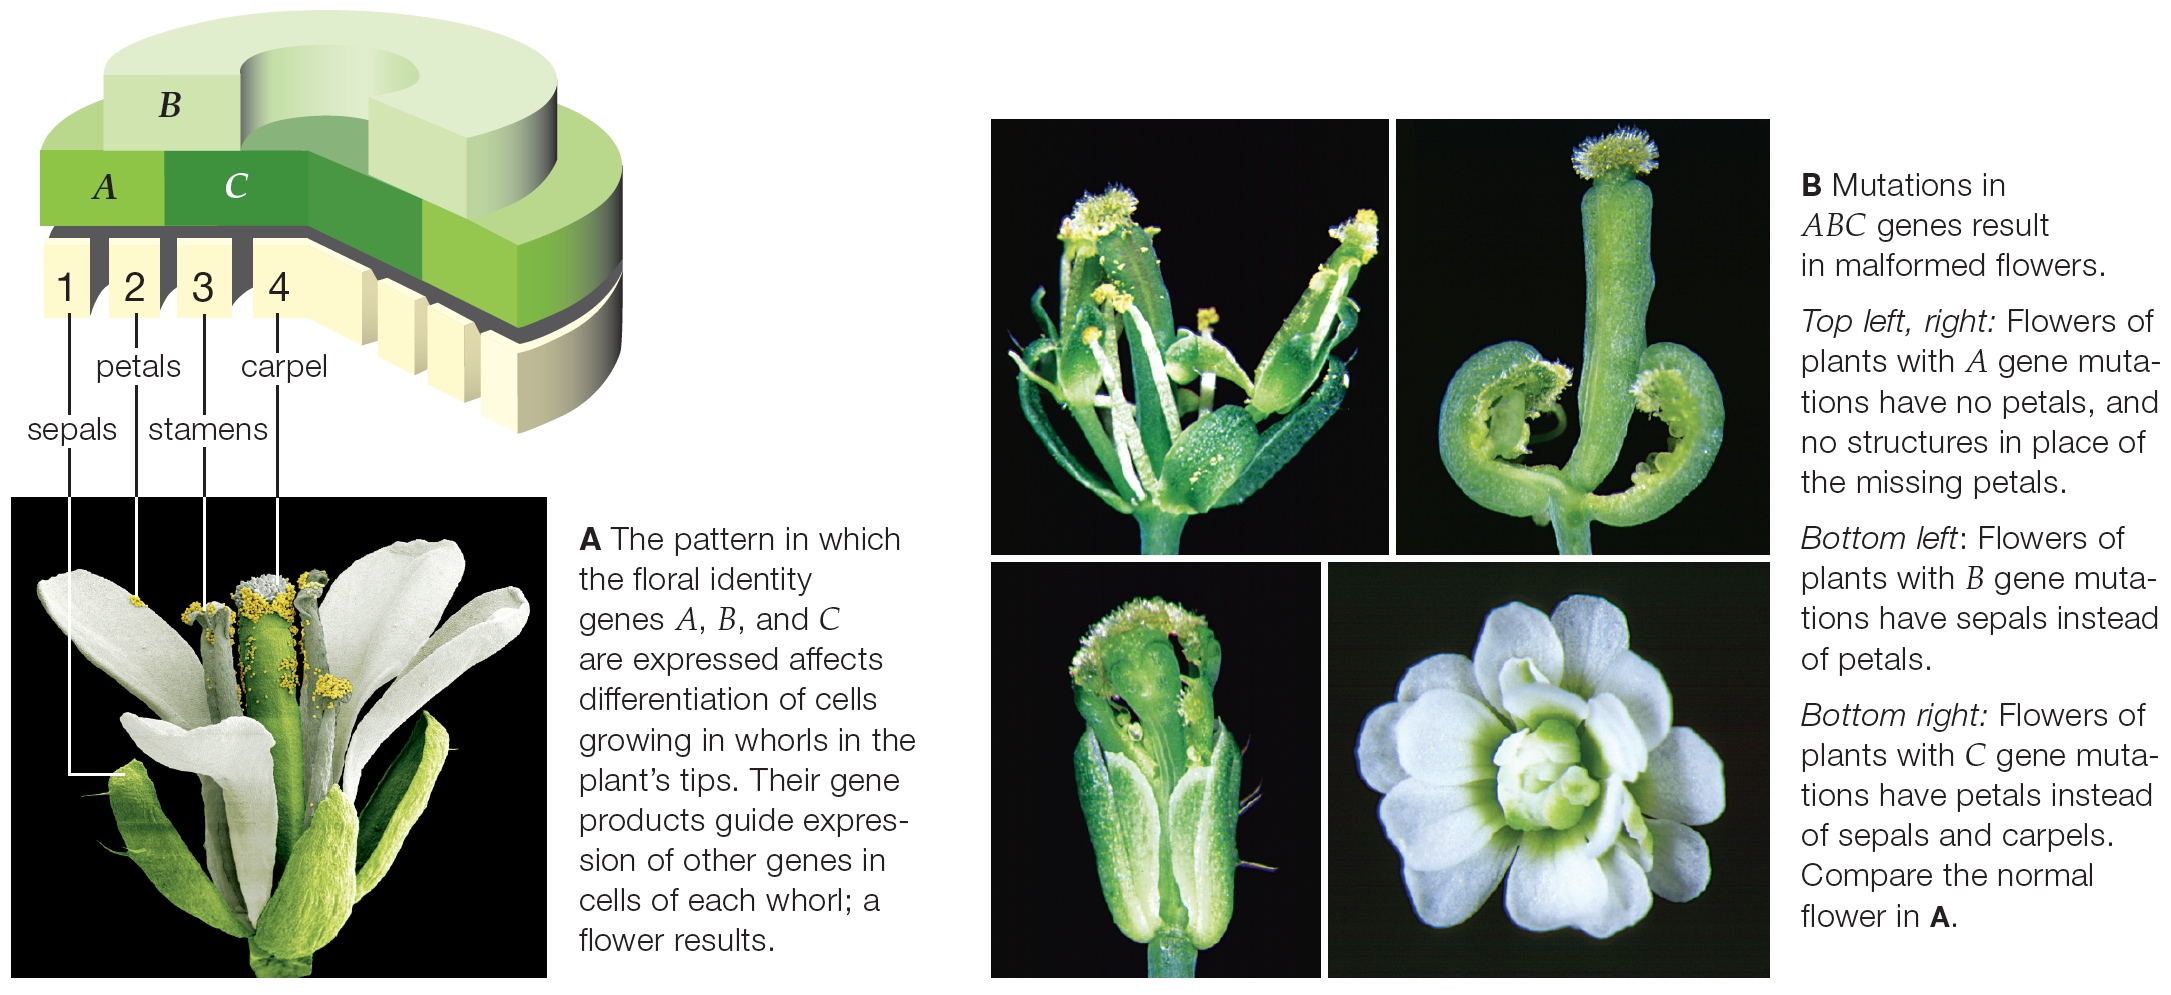 Control of flower formation, as revealed by mutations in Arabidopsis thaliana.